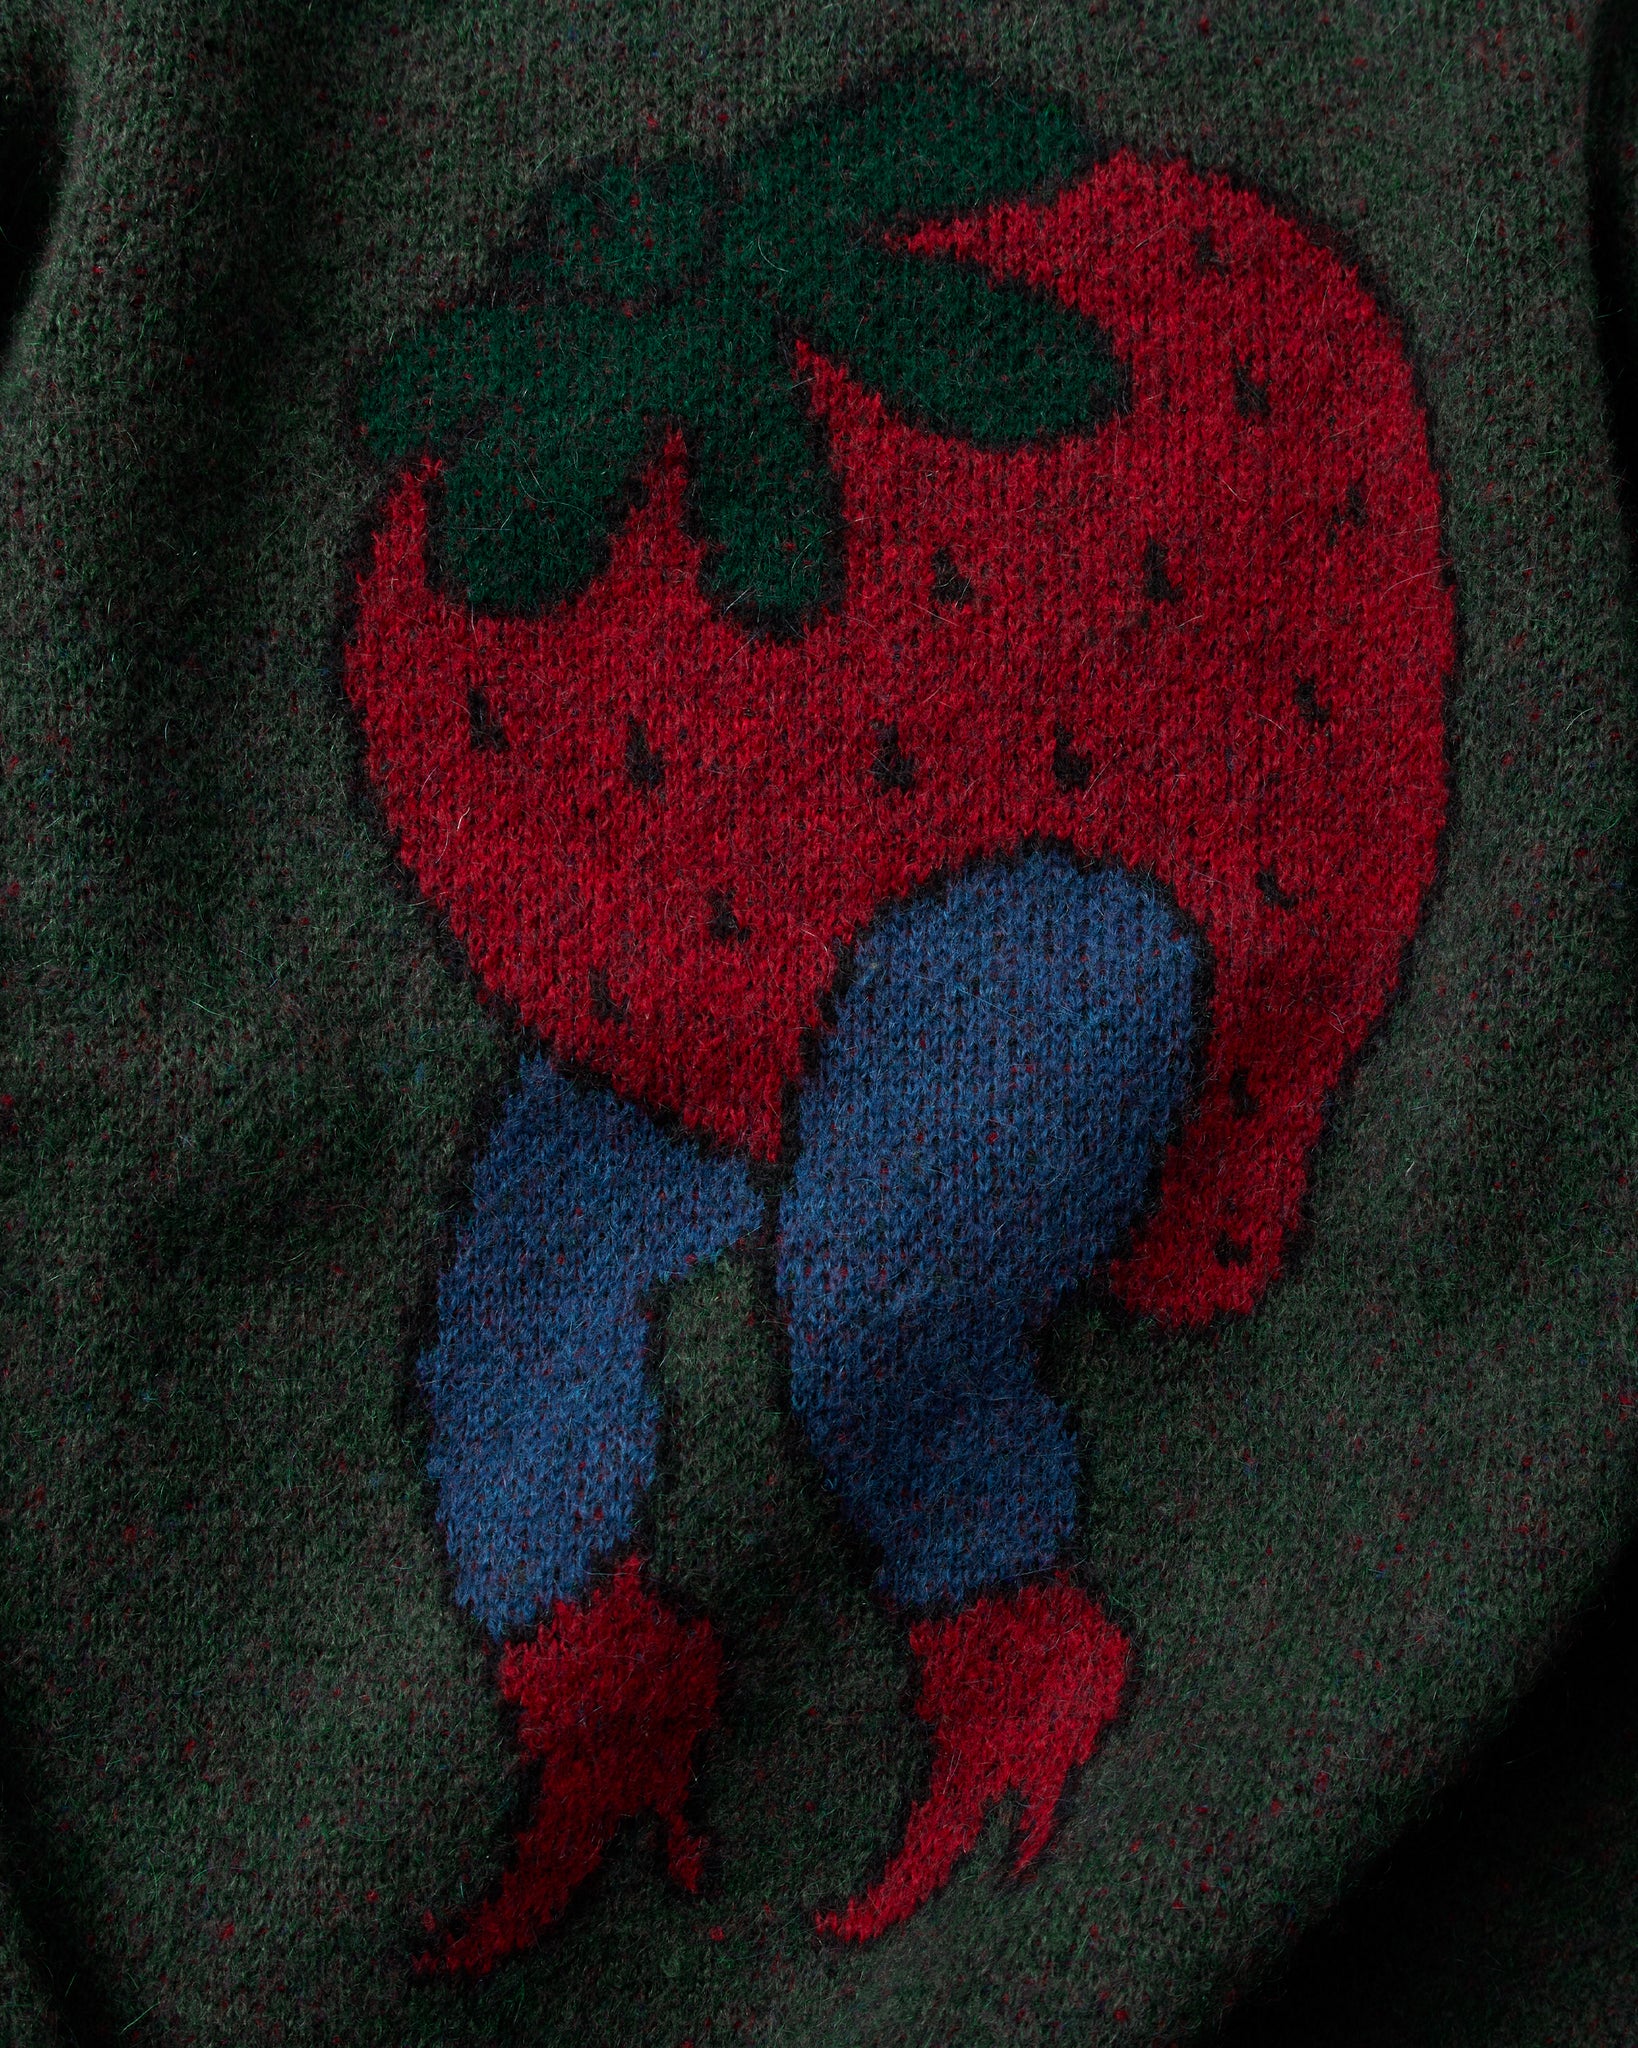 Stupid Strawberry Knitted Pullover